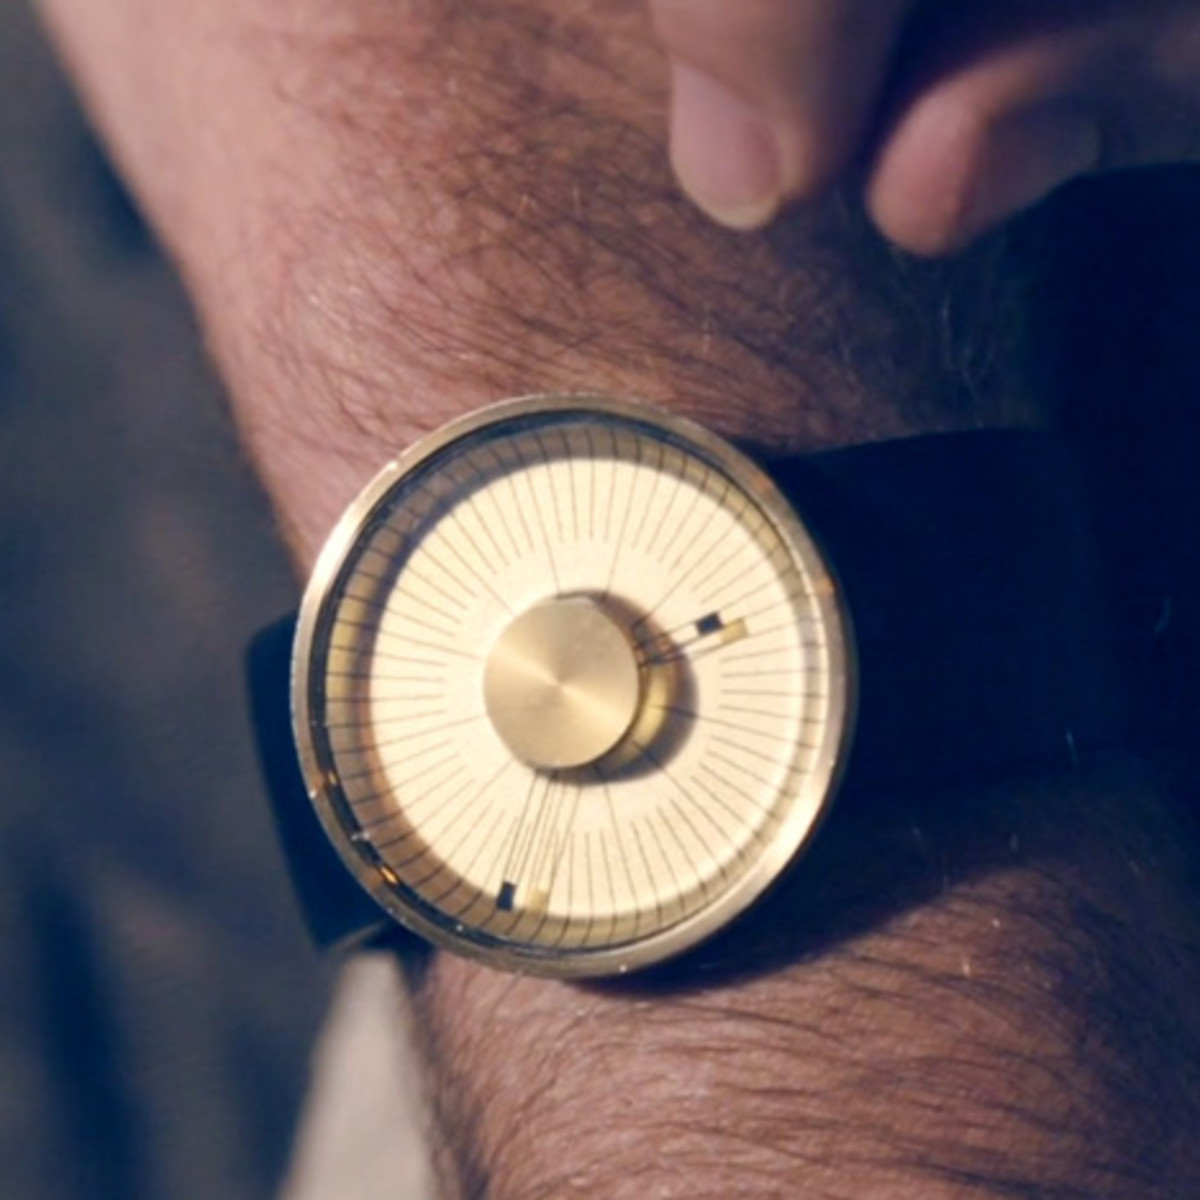 The ODM Michael Young Hacker watch takes its design influence from 50's automobiles and planes. 